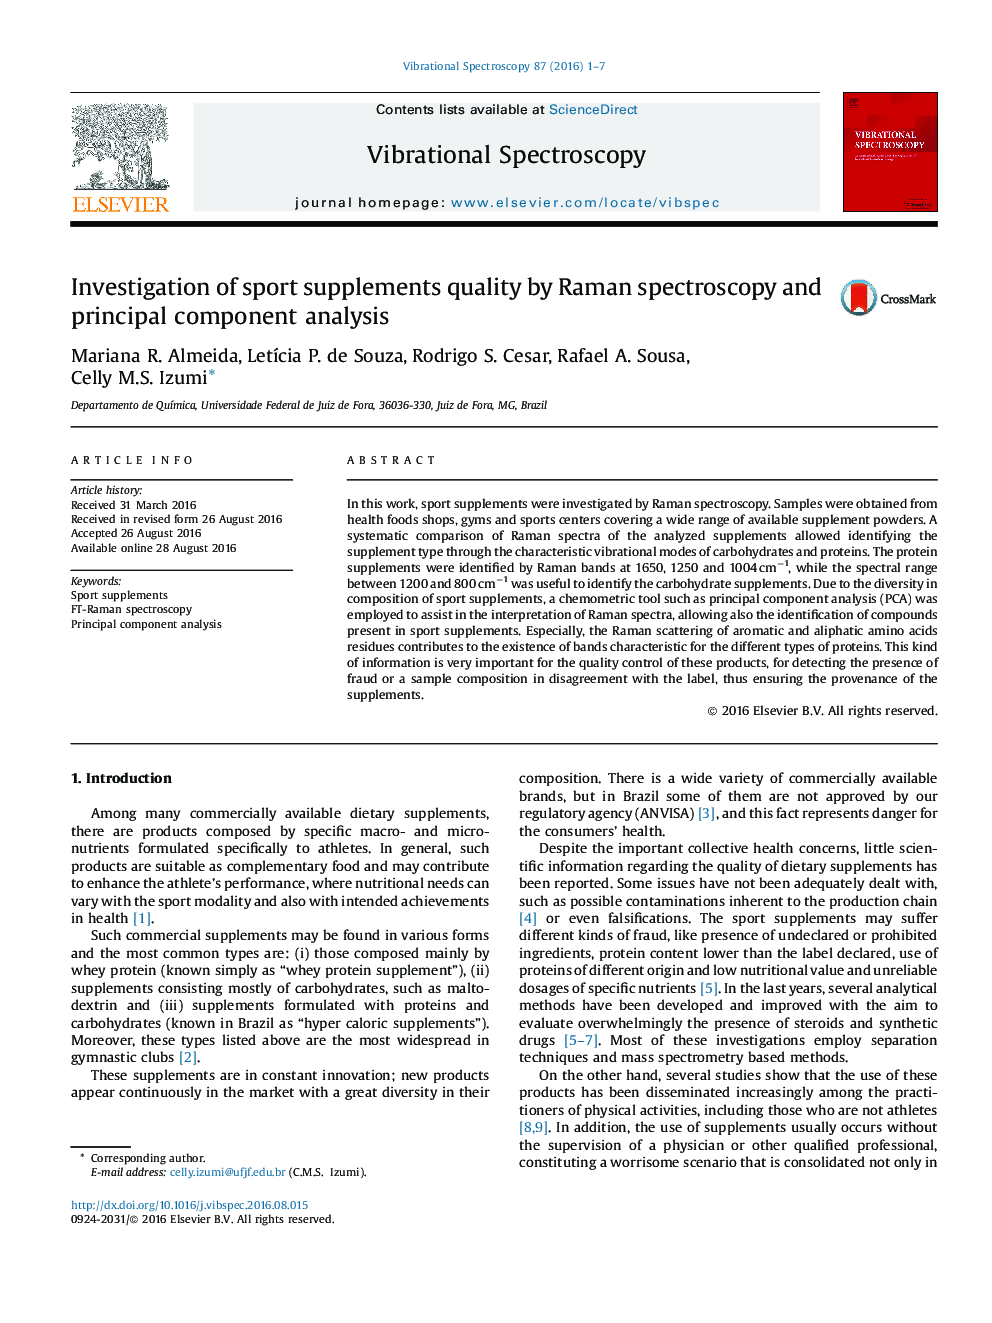 Investigation of sport supplements quality by Raman spectroscopy and principal component analysis